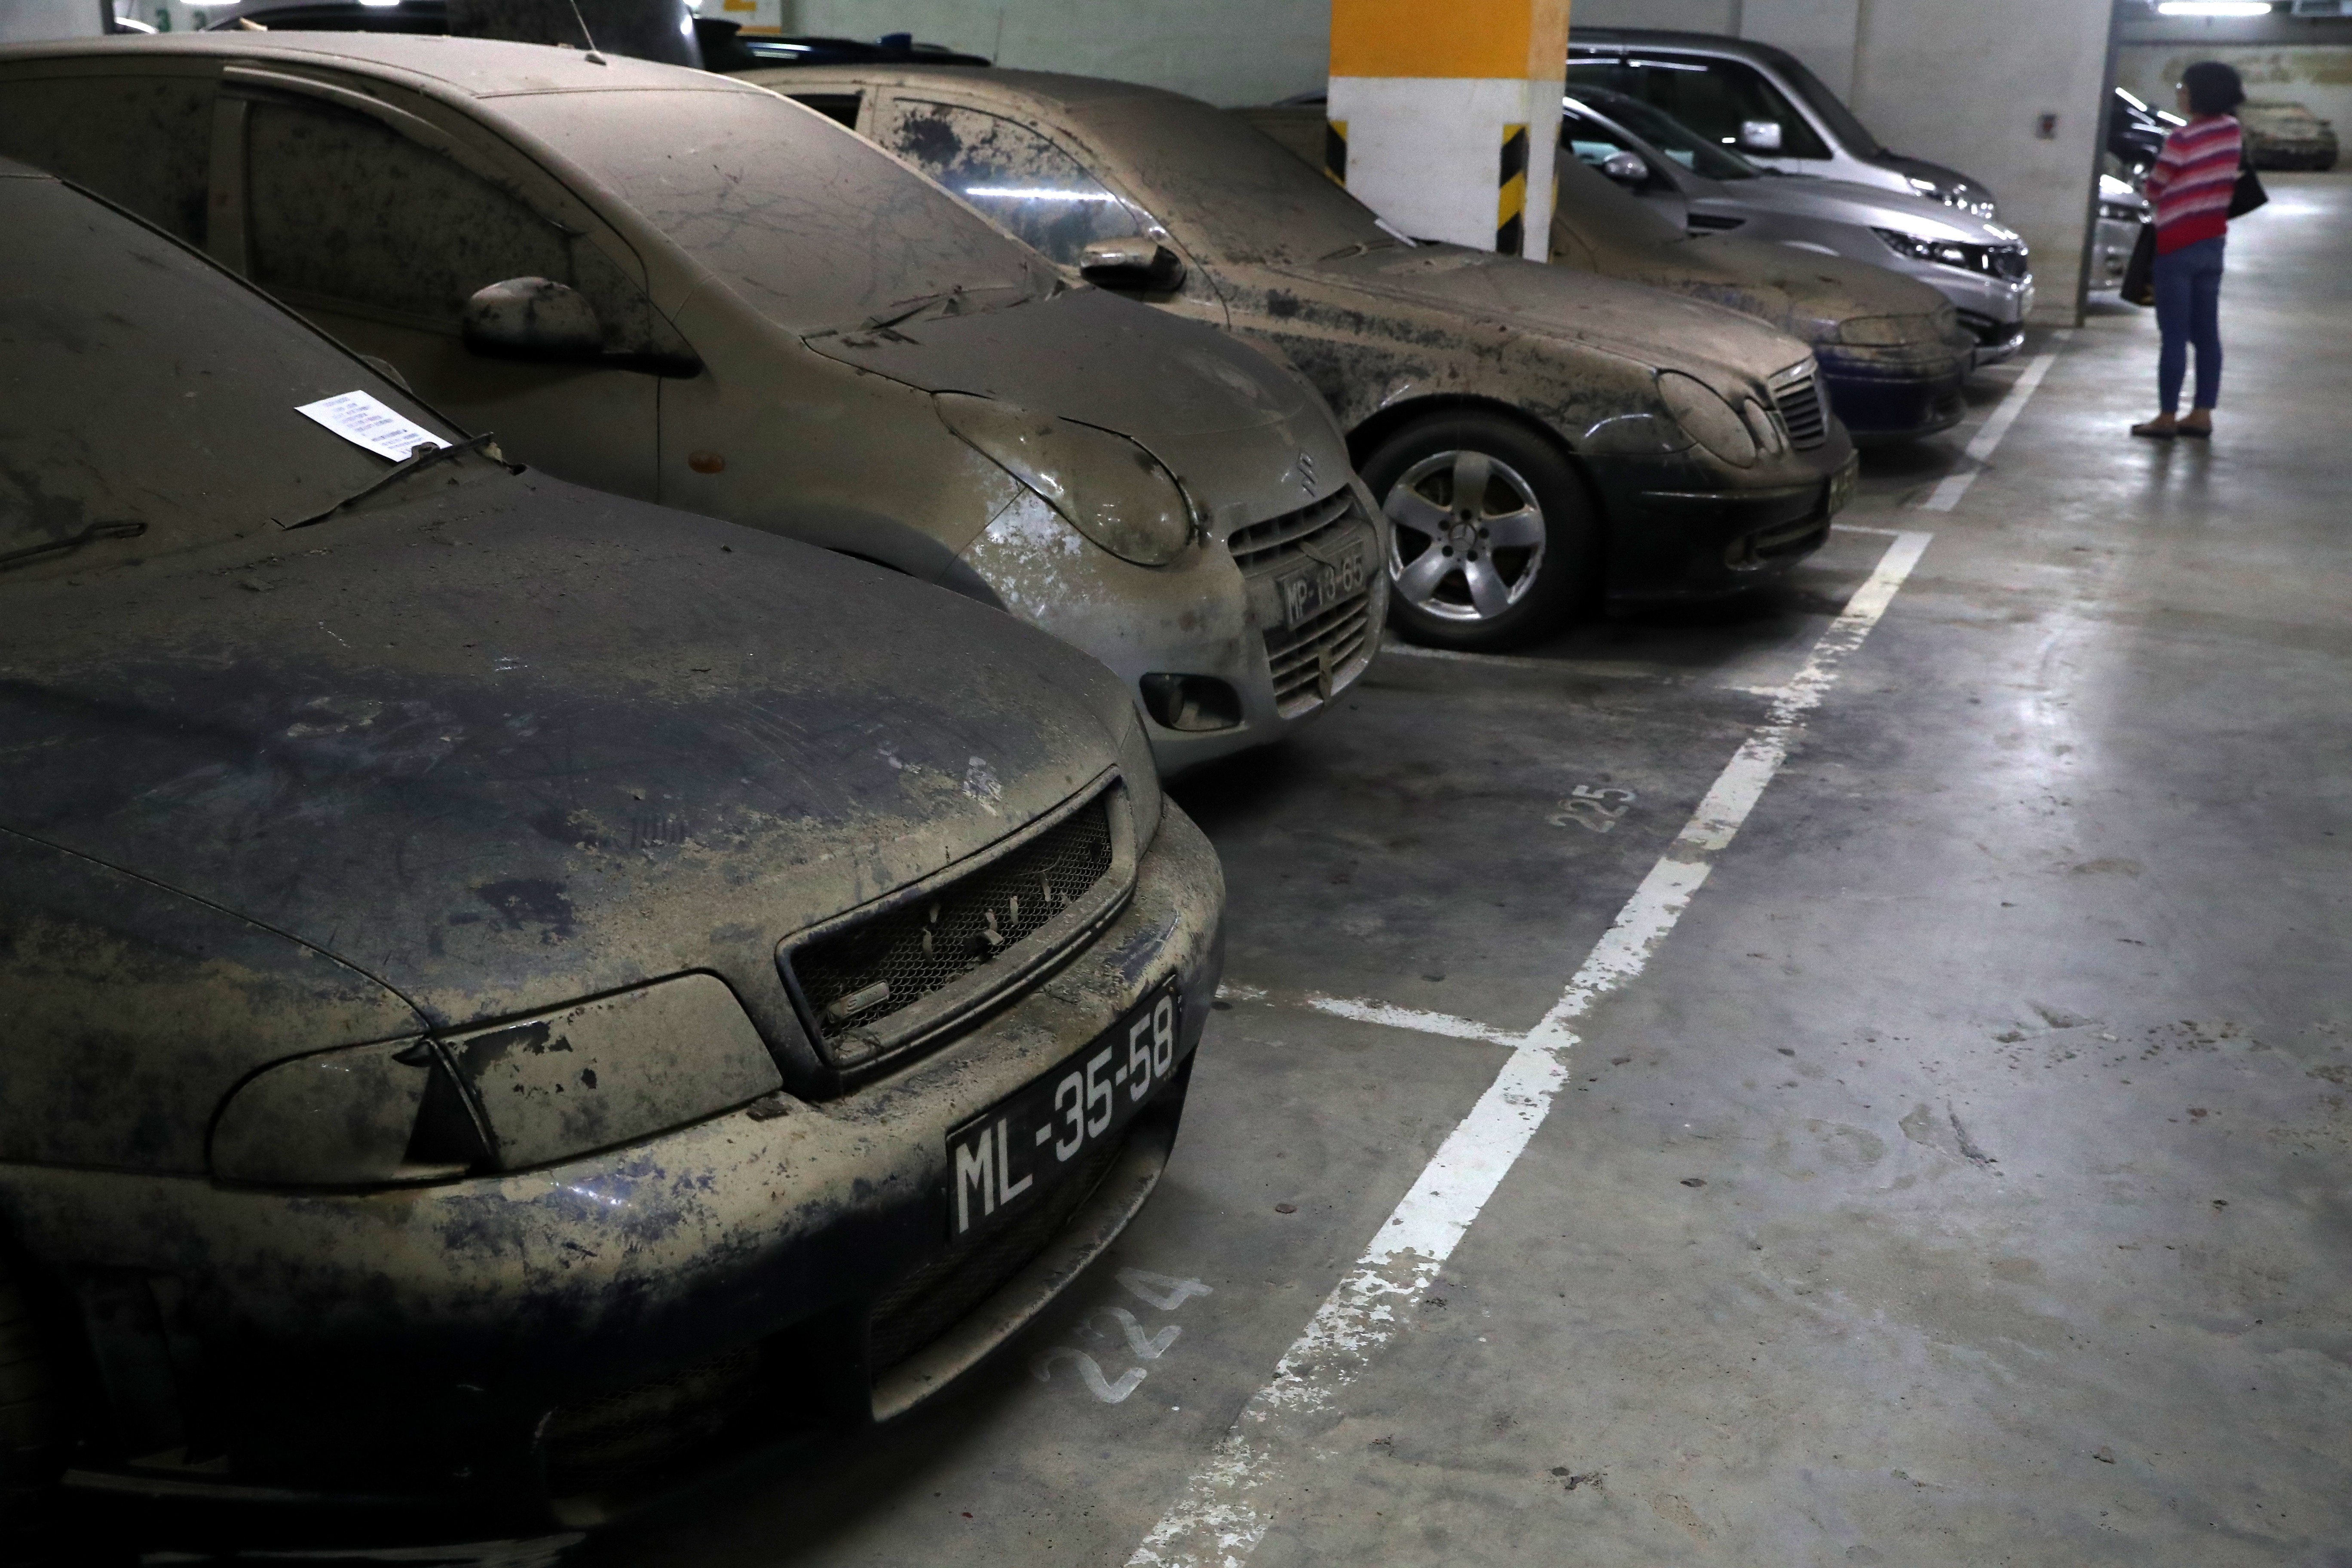 Damaged vehicles left at a basement car park near the Macau-Zhuhai border reflect a growing problem with the city’s infrastructure. Photo: K.Y. Cheng